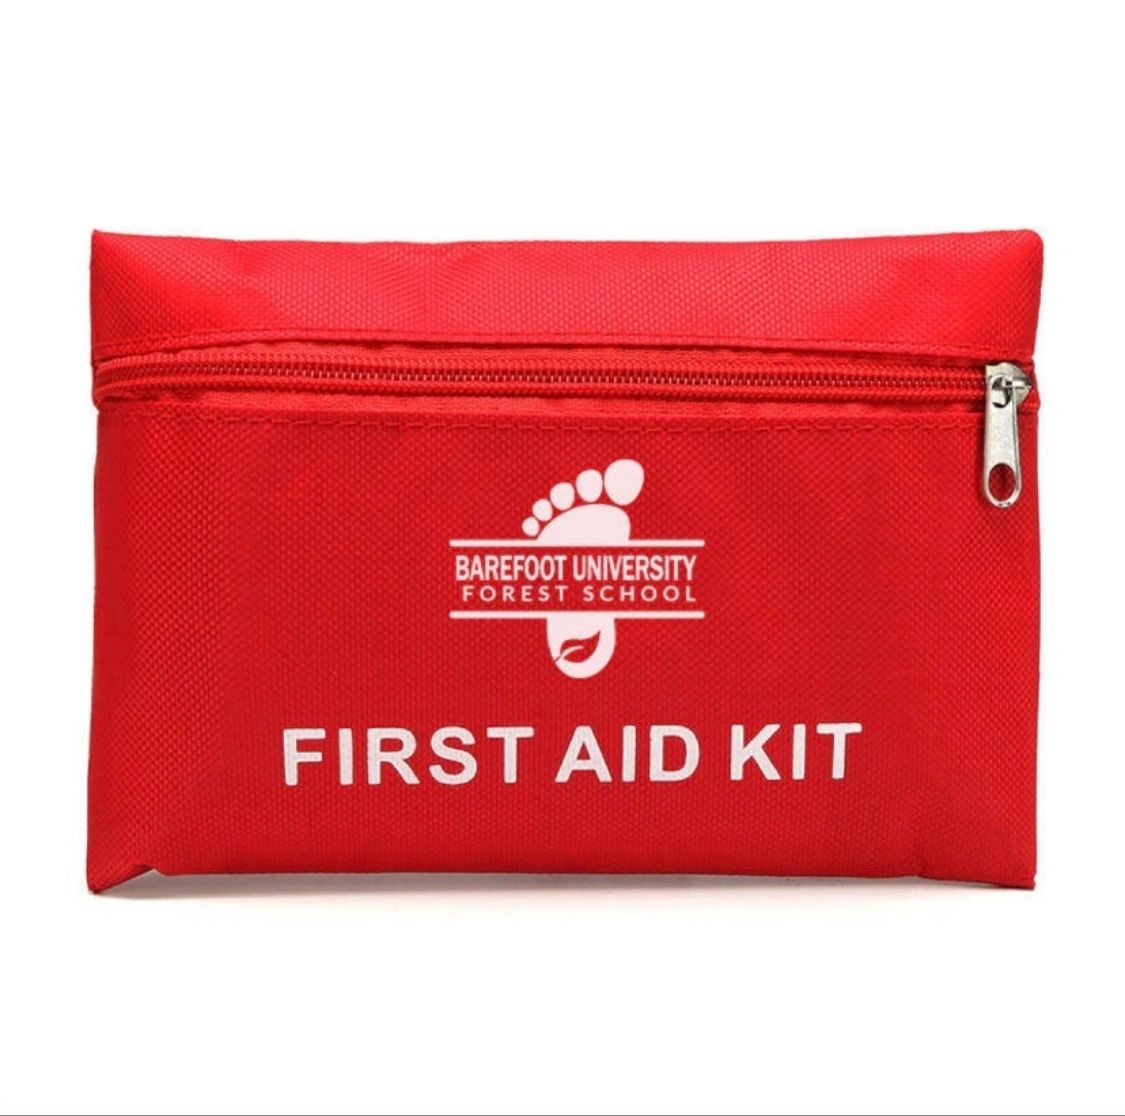 Featured image for “Barefoot First Aid Kit”